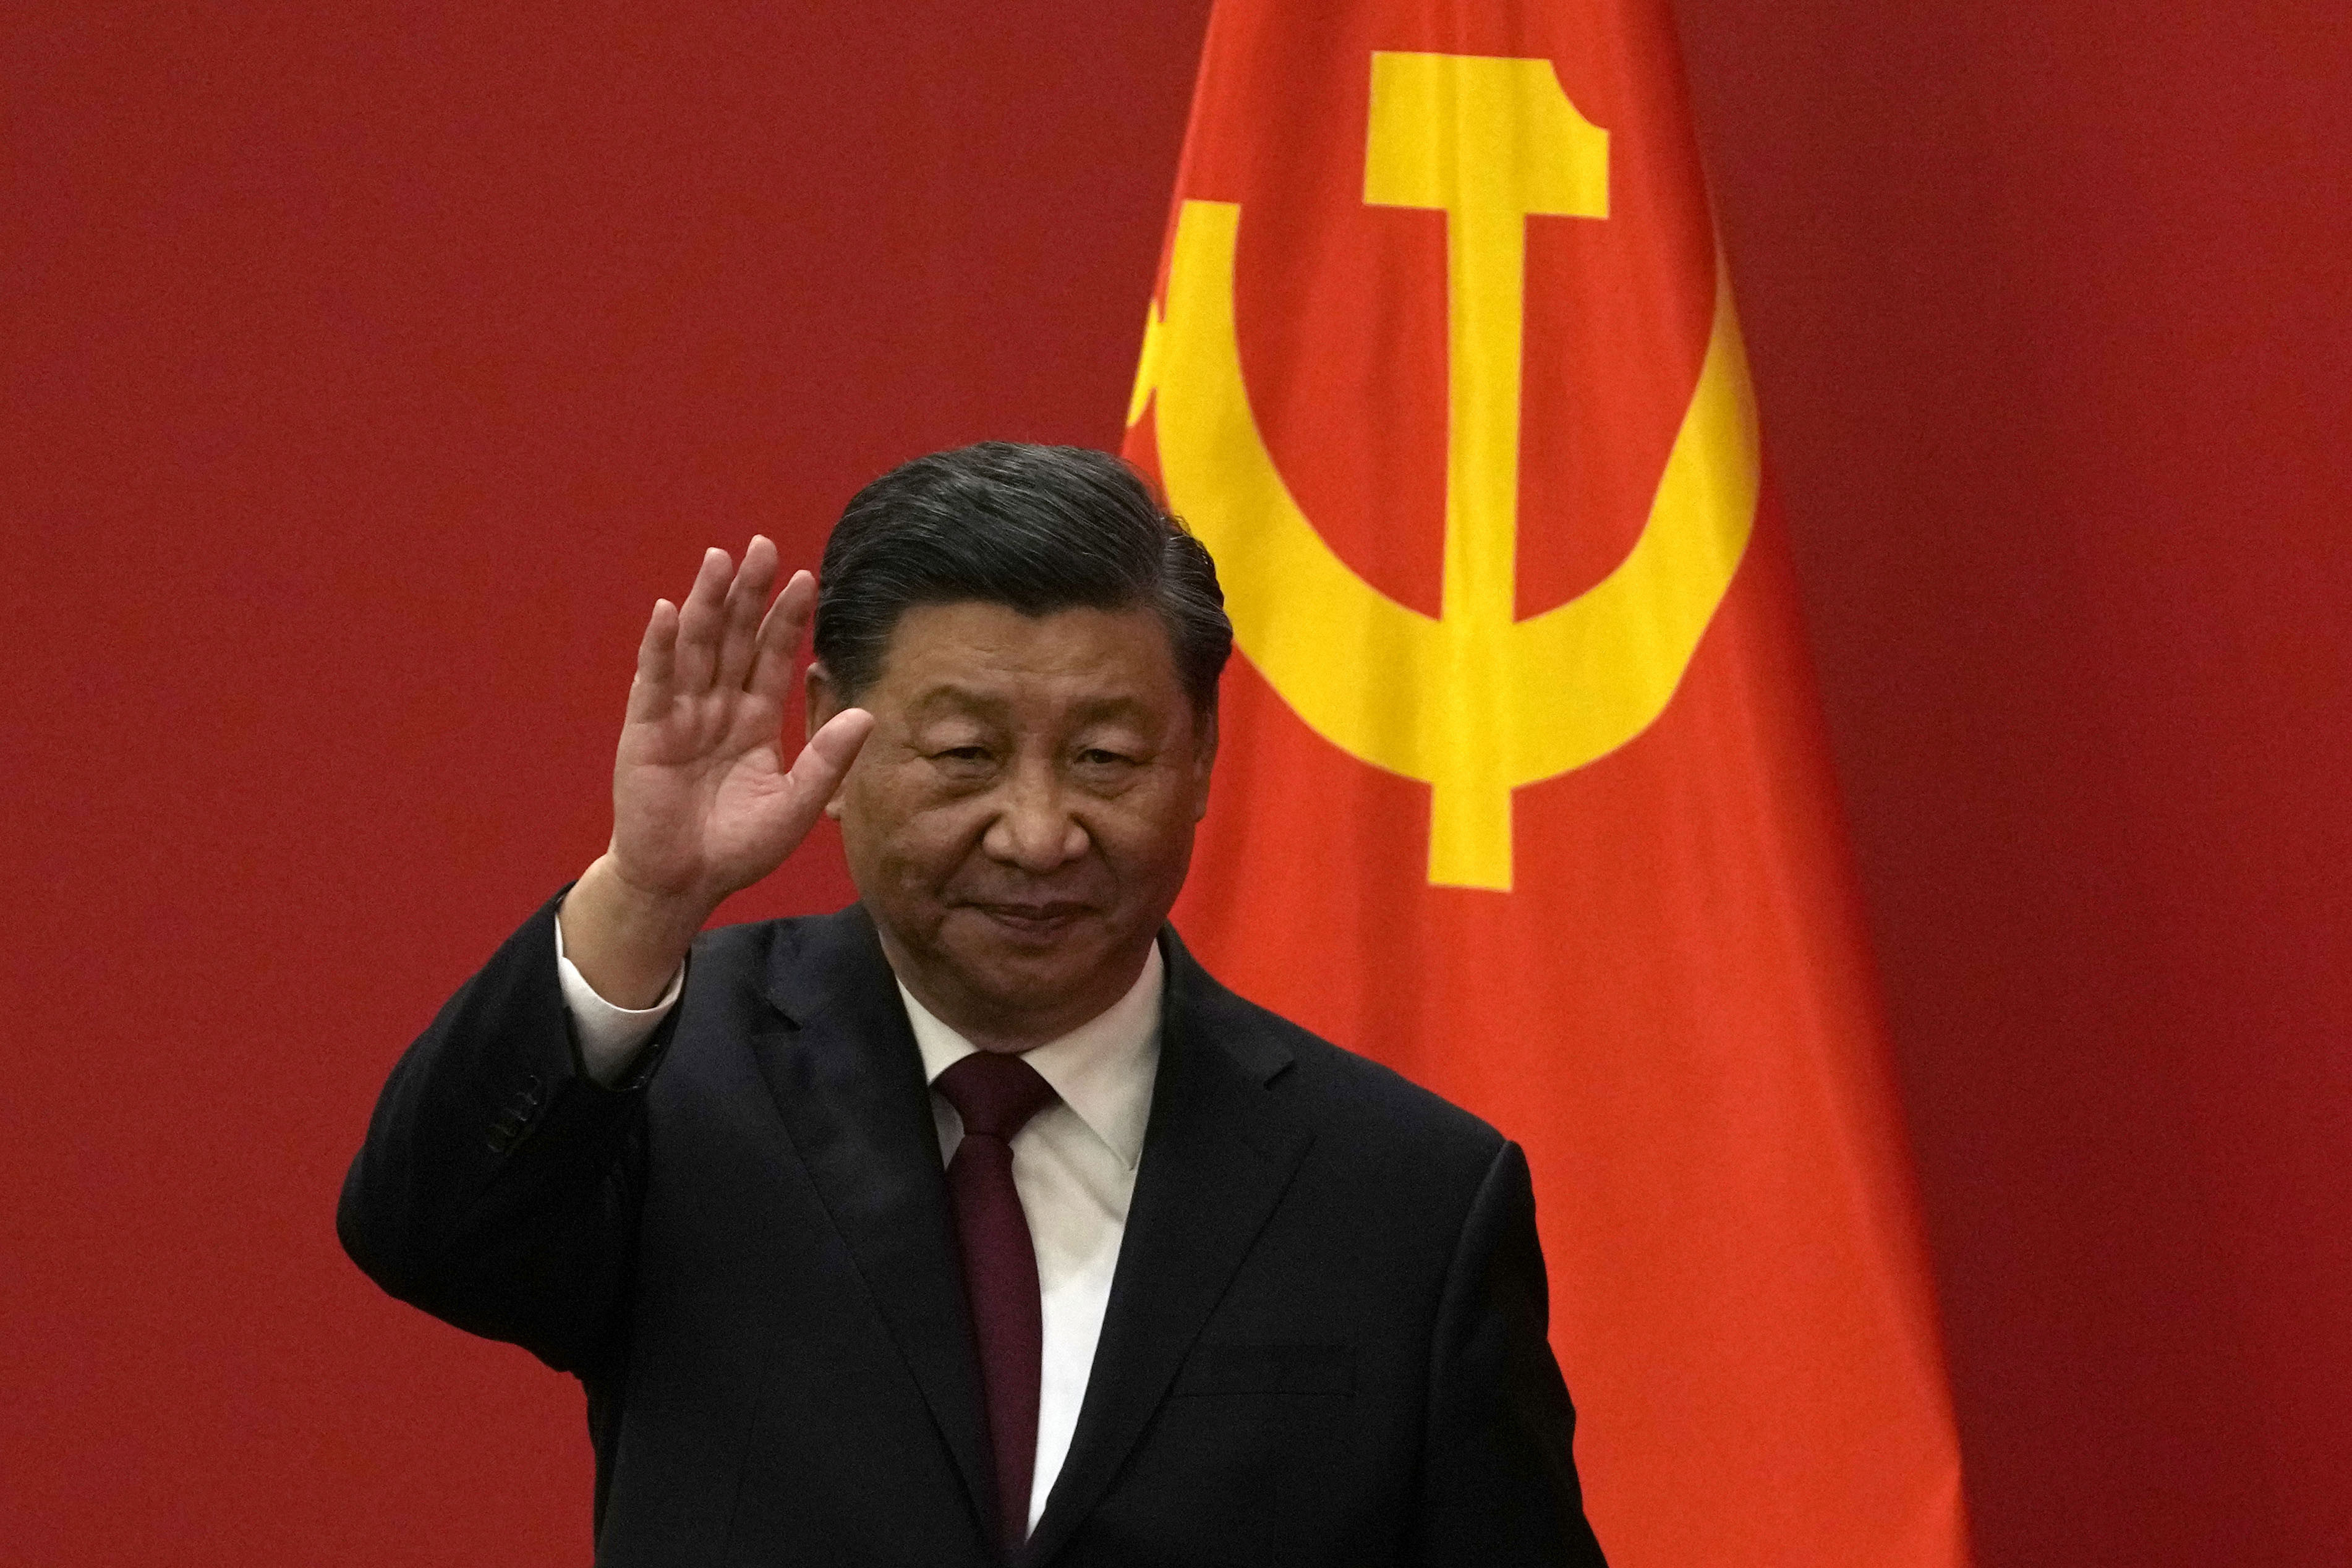 Chinese President Xi Jinping waves at an event to introduce new members of the Politburo Standing Committee at the Great Hall of the People in Beijing on October 23. Western commentary on Xi’s appointment is rather self-regarding, considering that in America, term limits for presidents are a relatively recent measure. Photo: AP